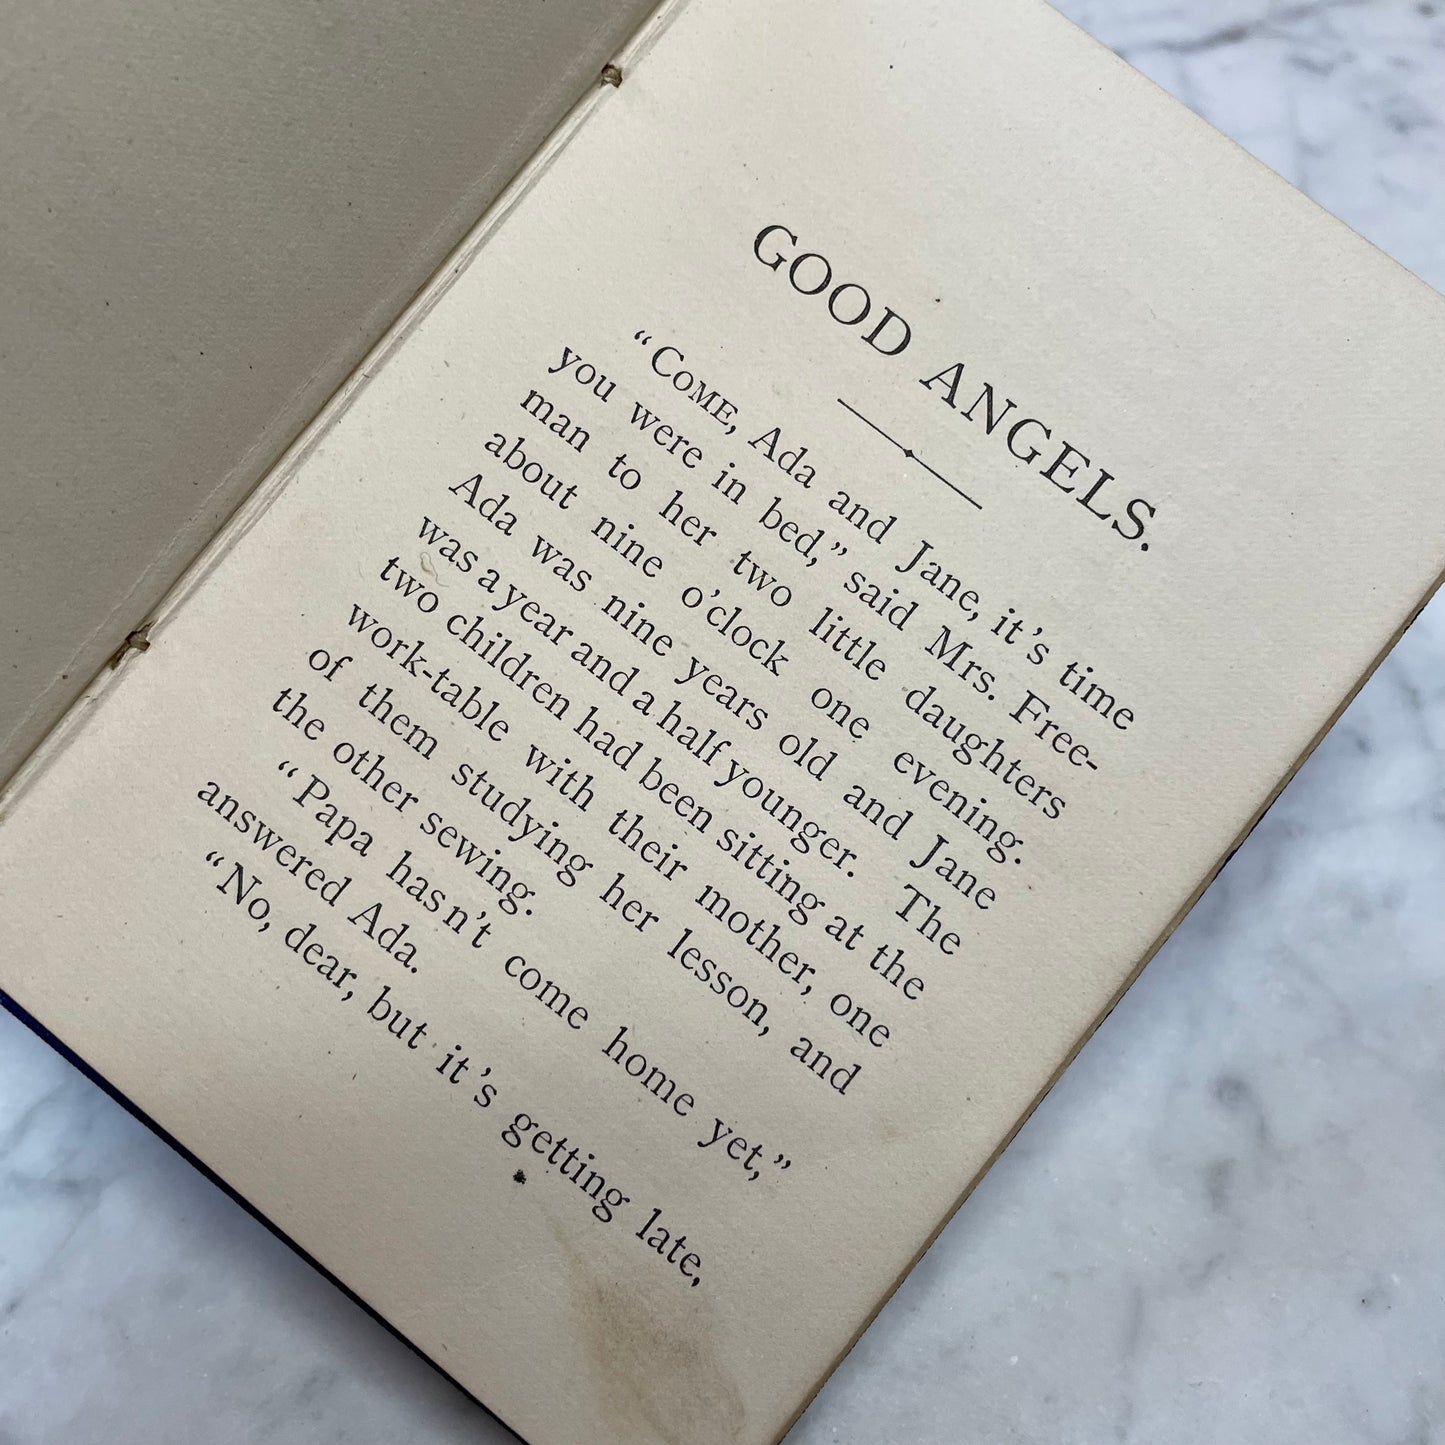 Good Angels & Other Stories